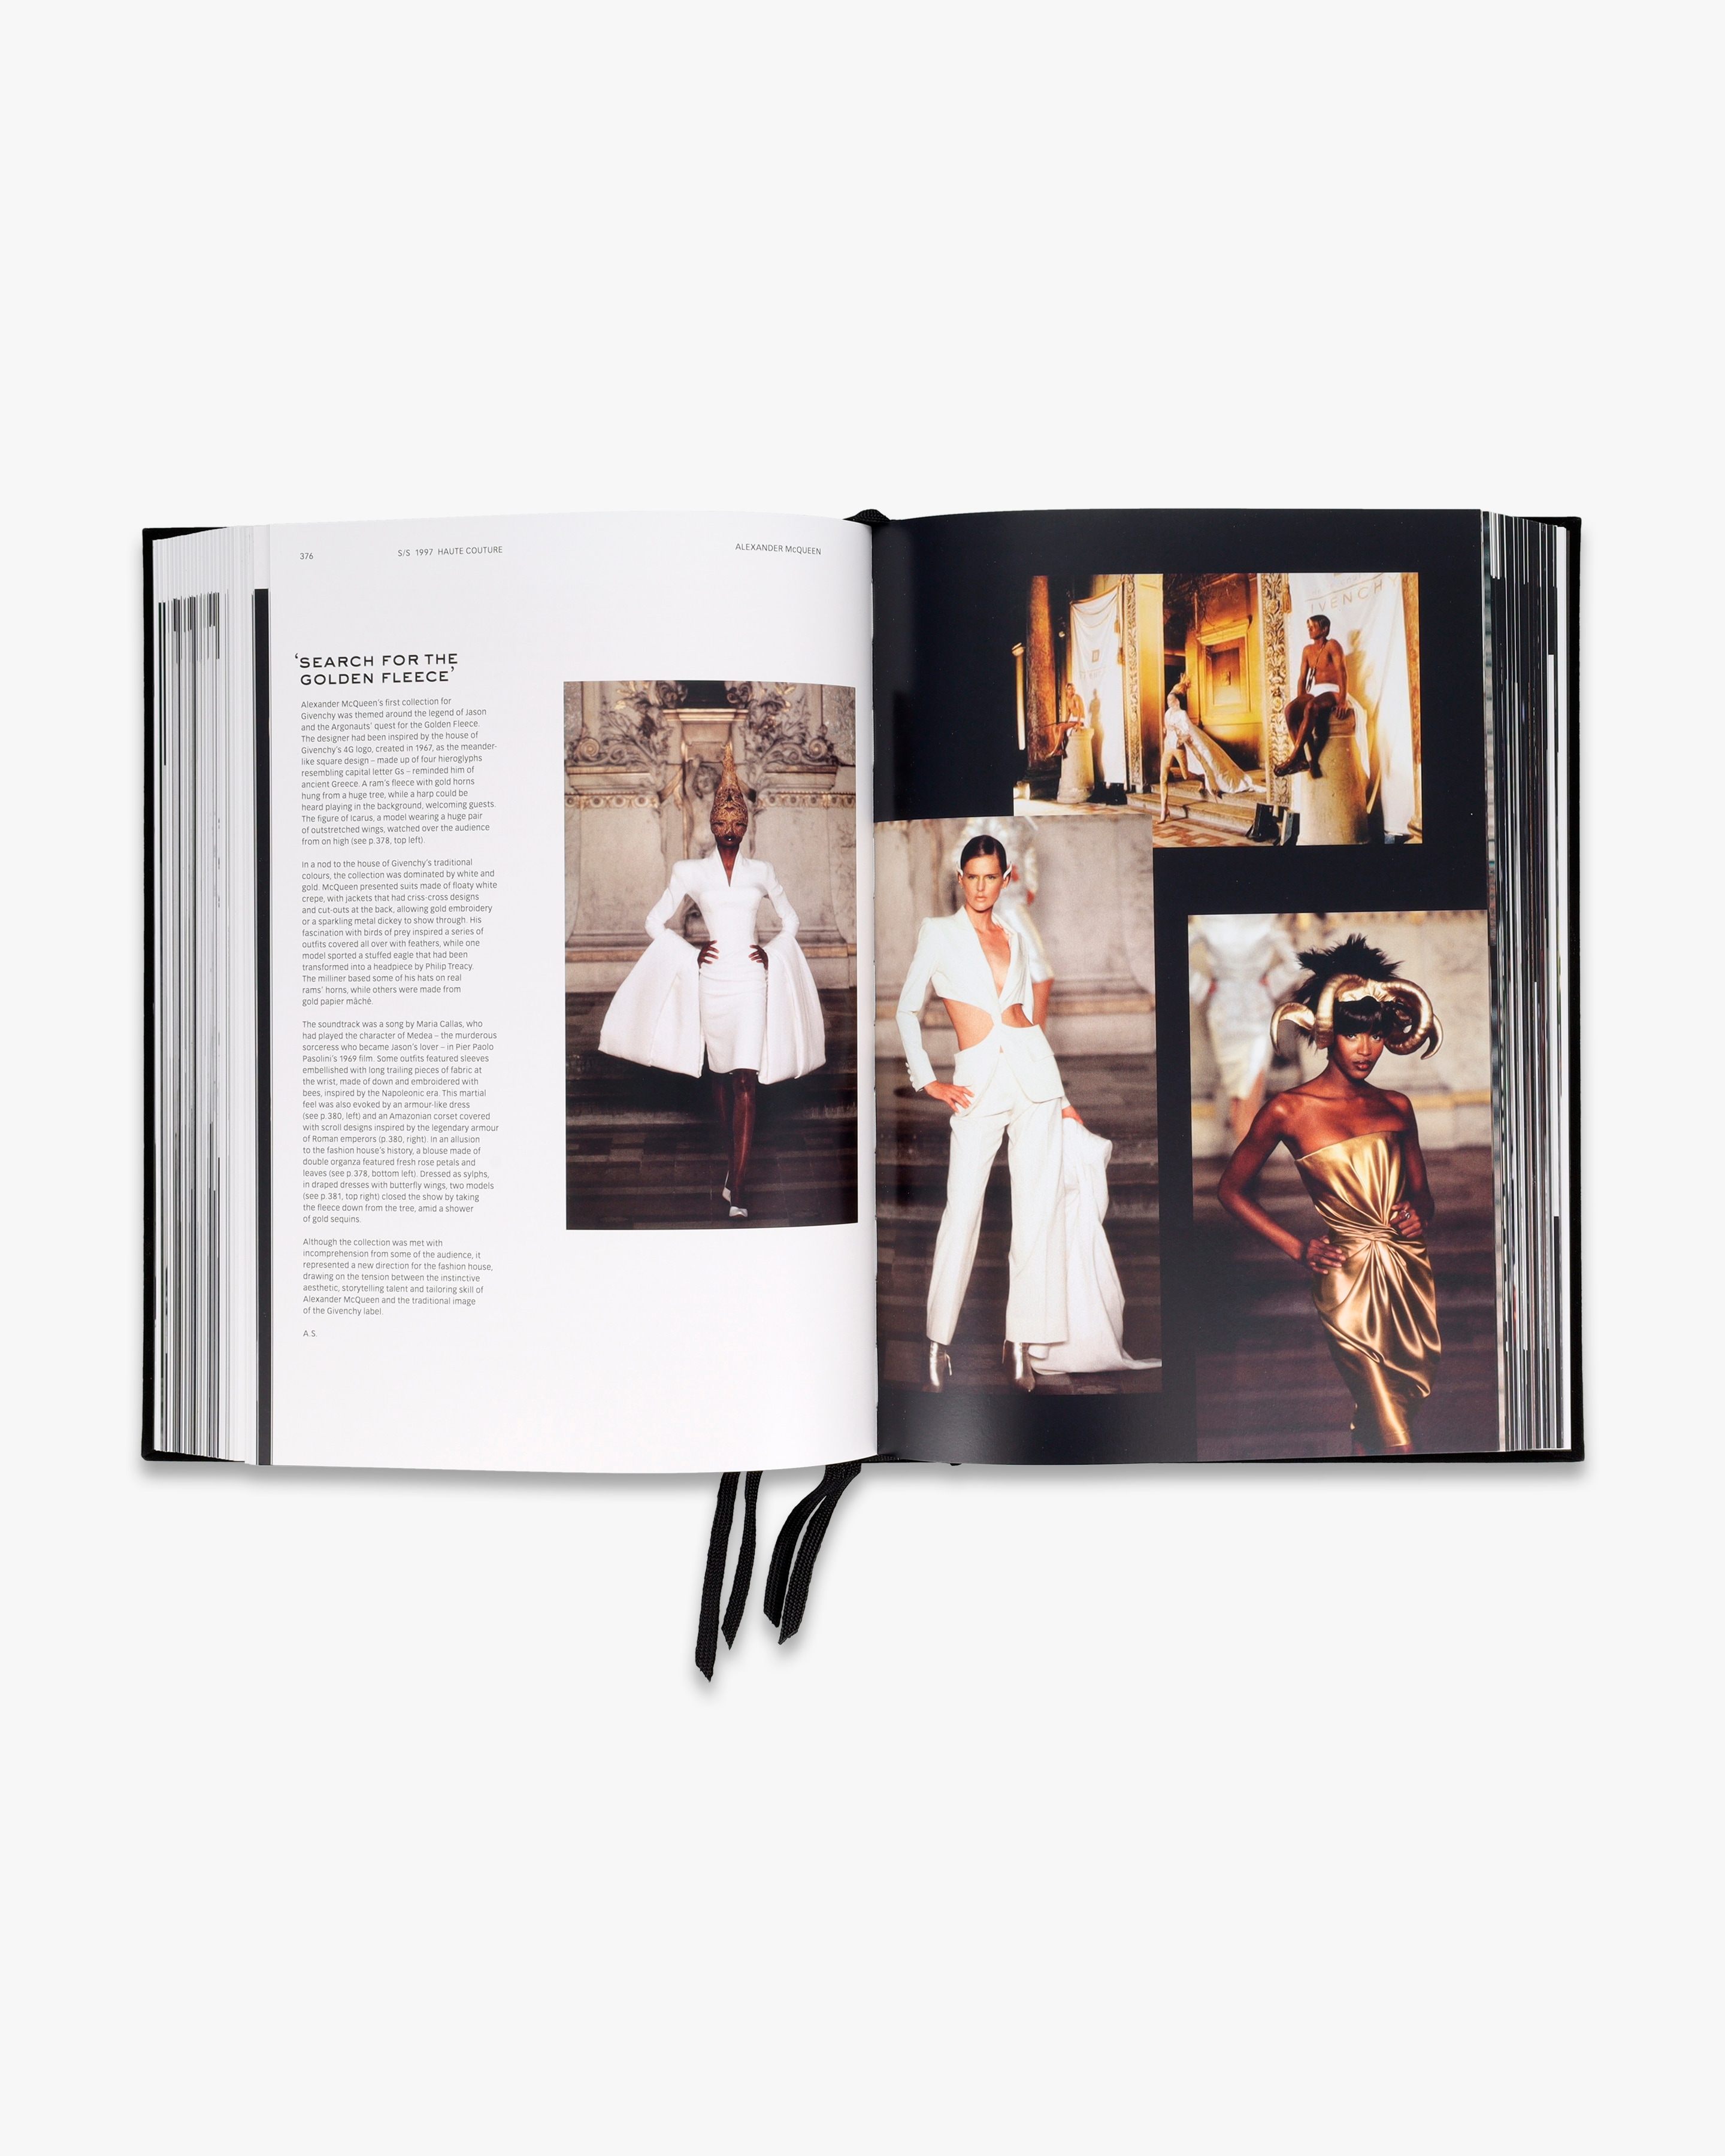 Givenchy Catwalk Book